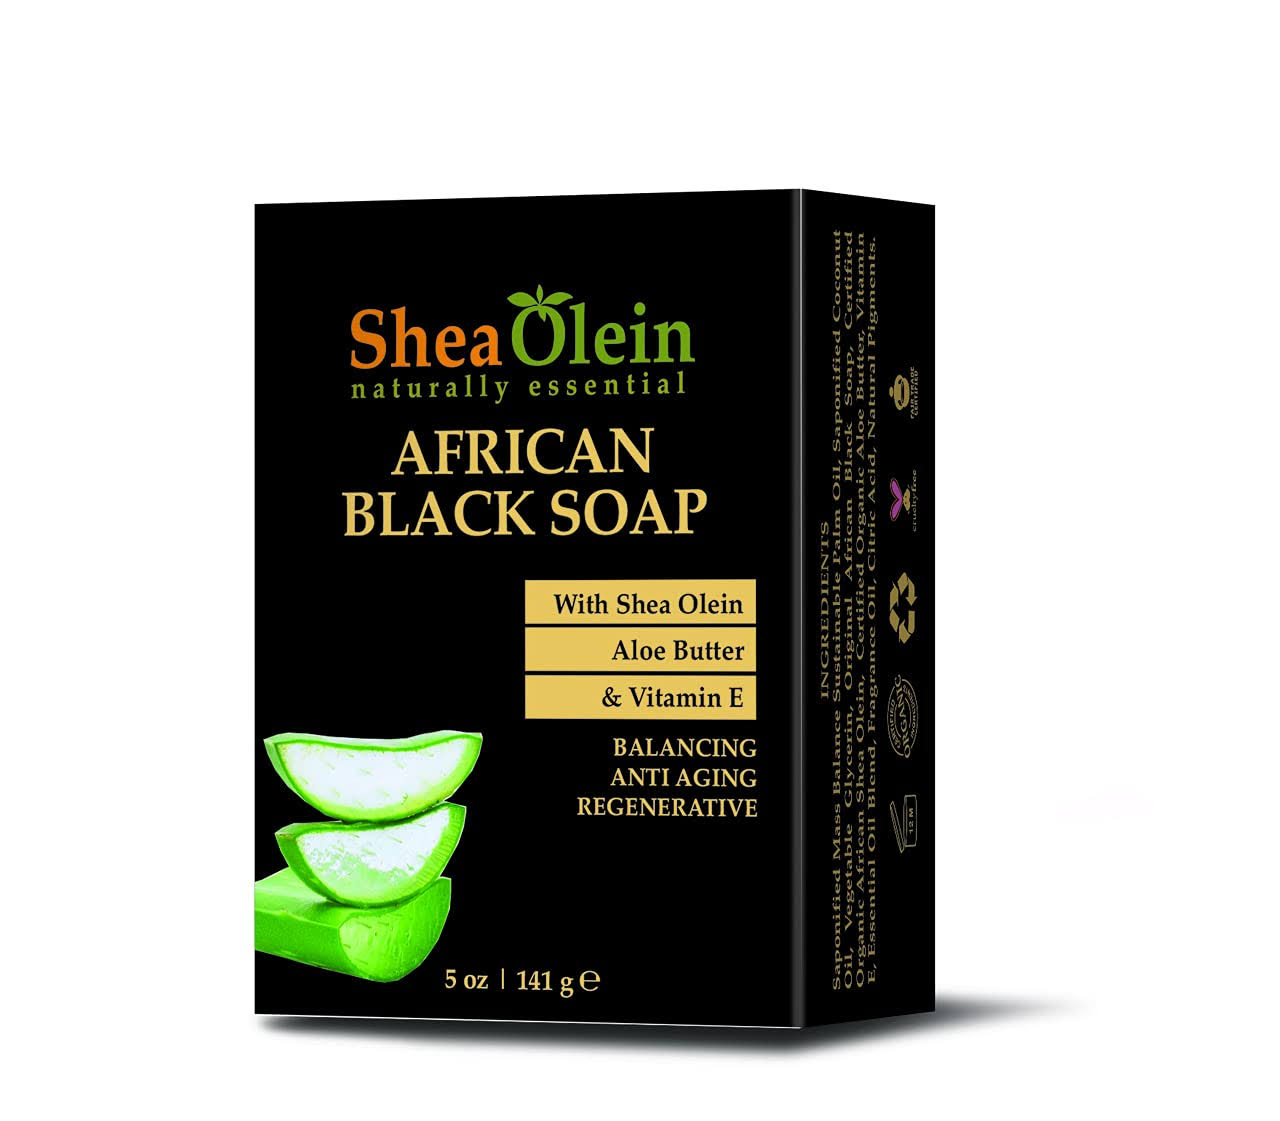 African Black Soap with Shea Olein, Aloe Butter and Vitamin E